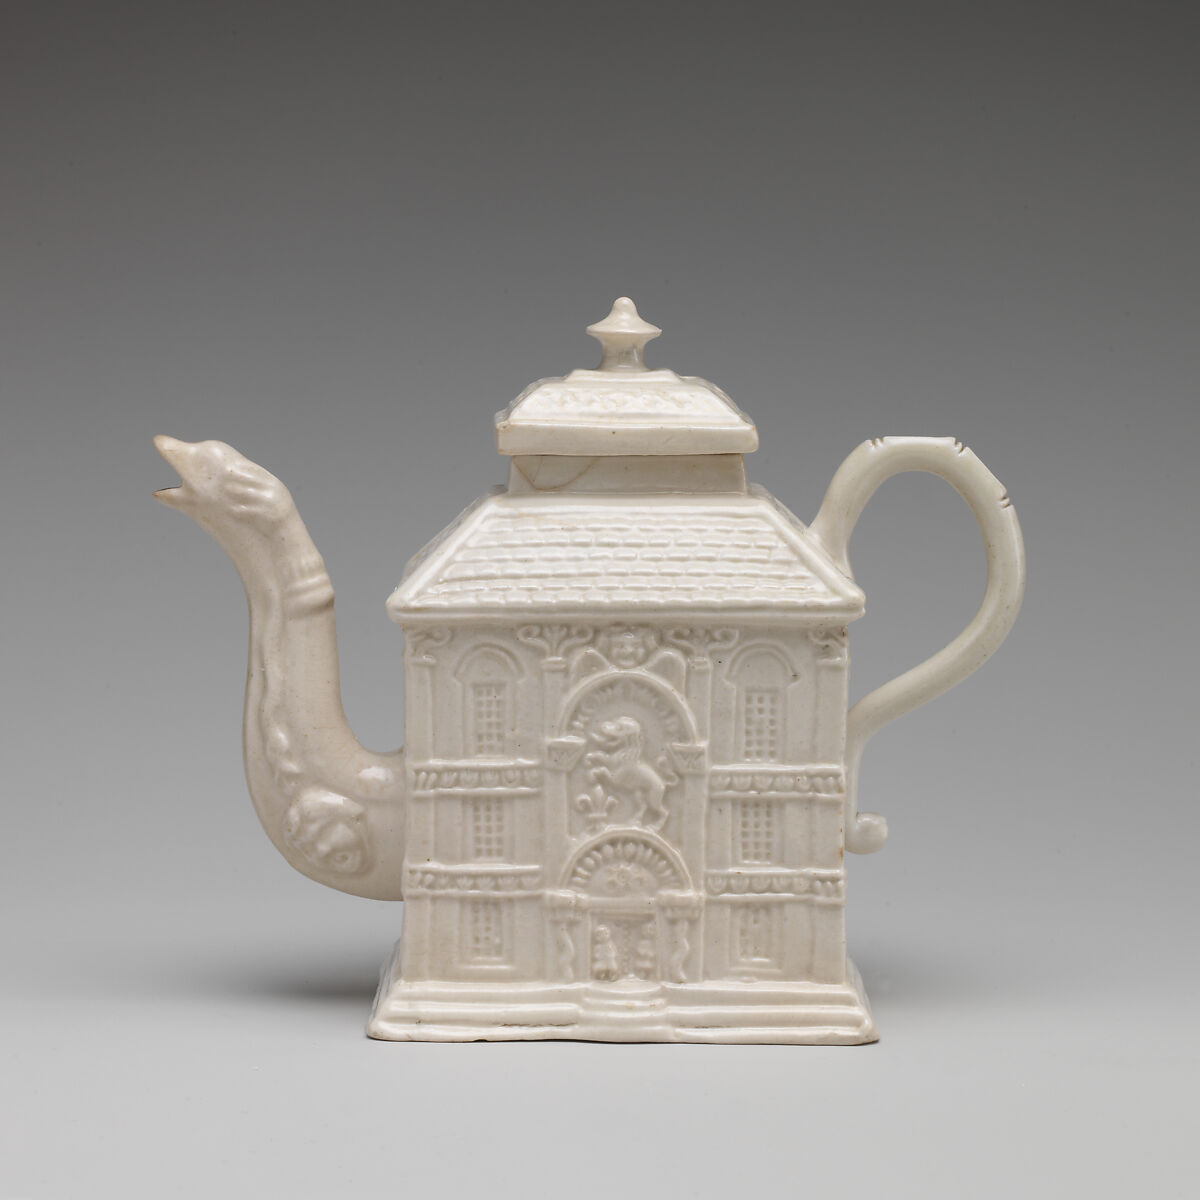 Teapot in the form of a house, Salt-glazed stoneware, probably British, Staffordshire 